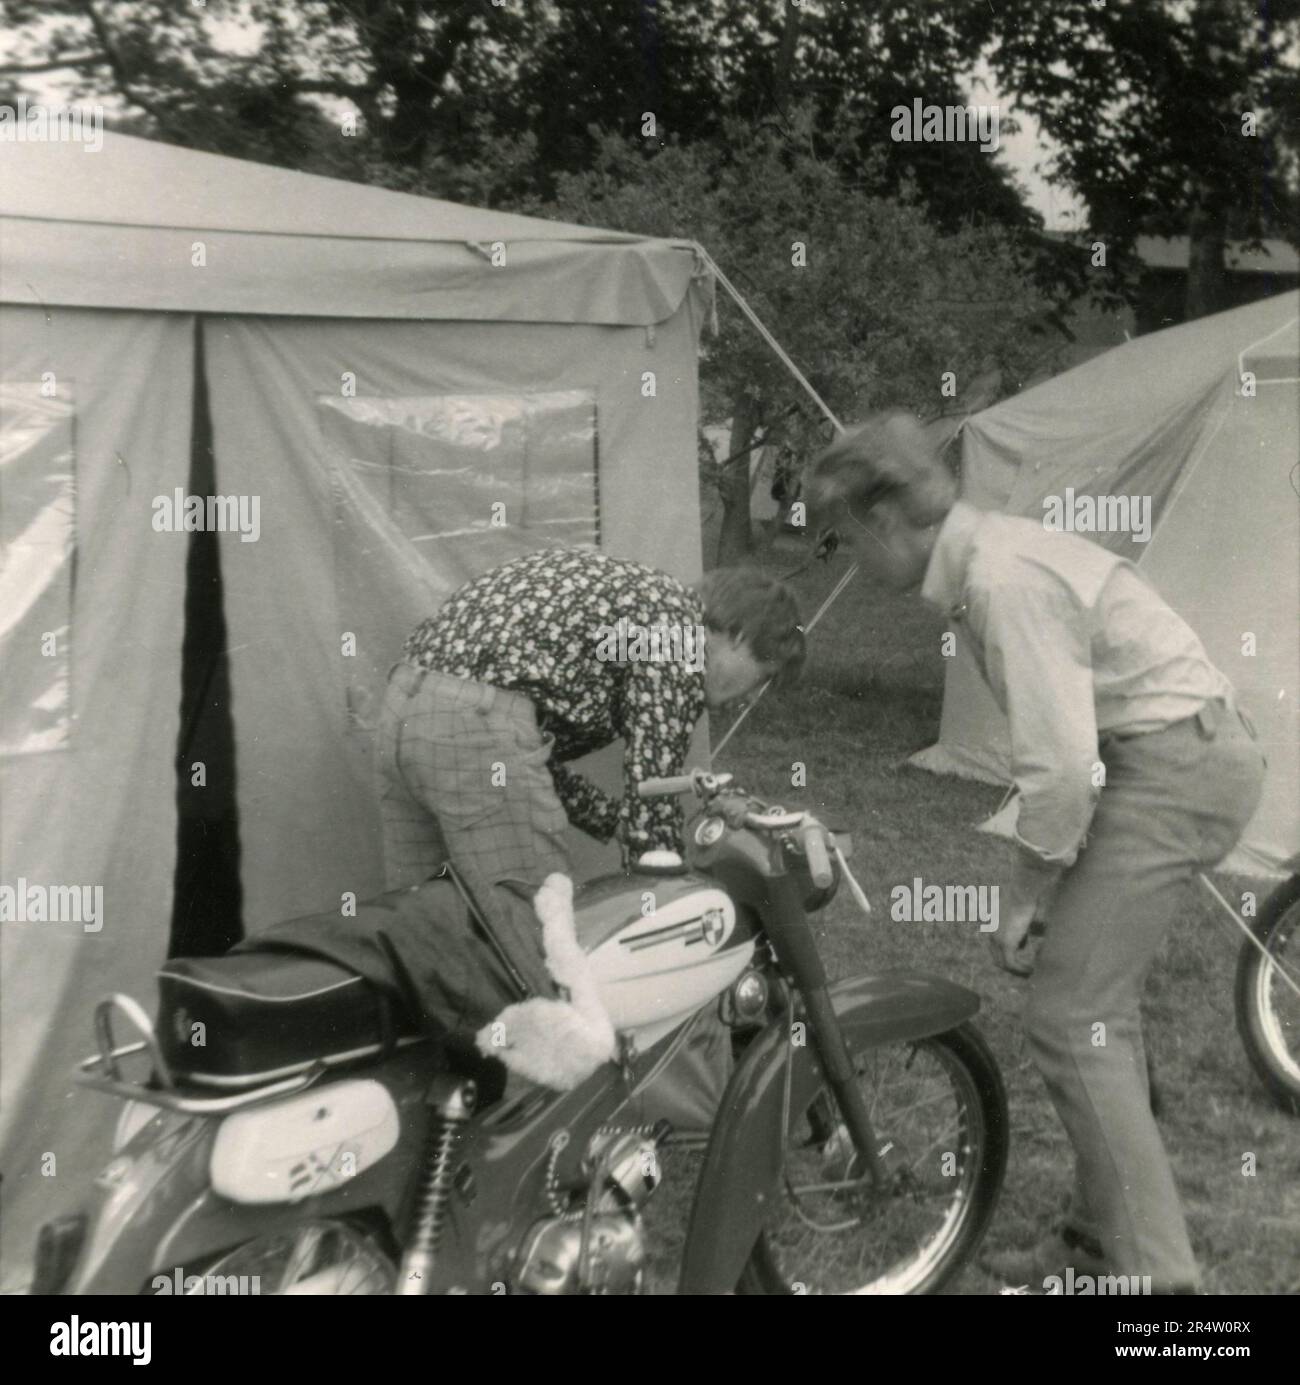 Camping in the 1960s: The tent and the motorbikes parked outside, Denmark 1966 Stock Photo